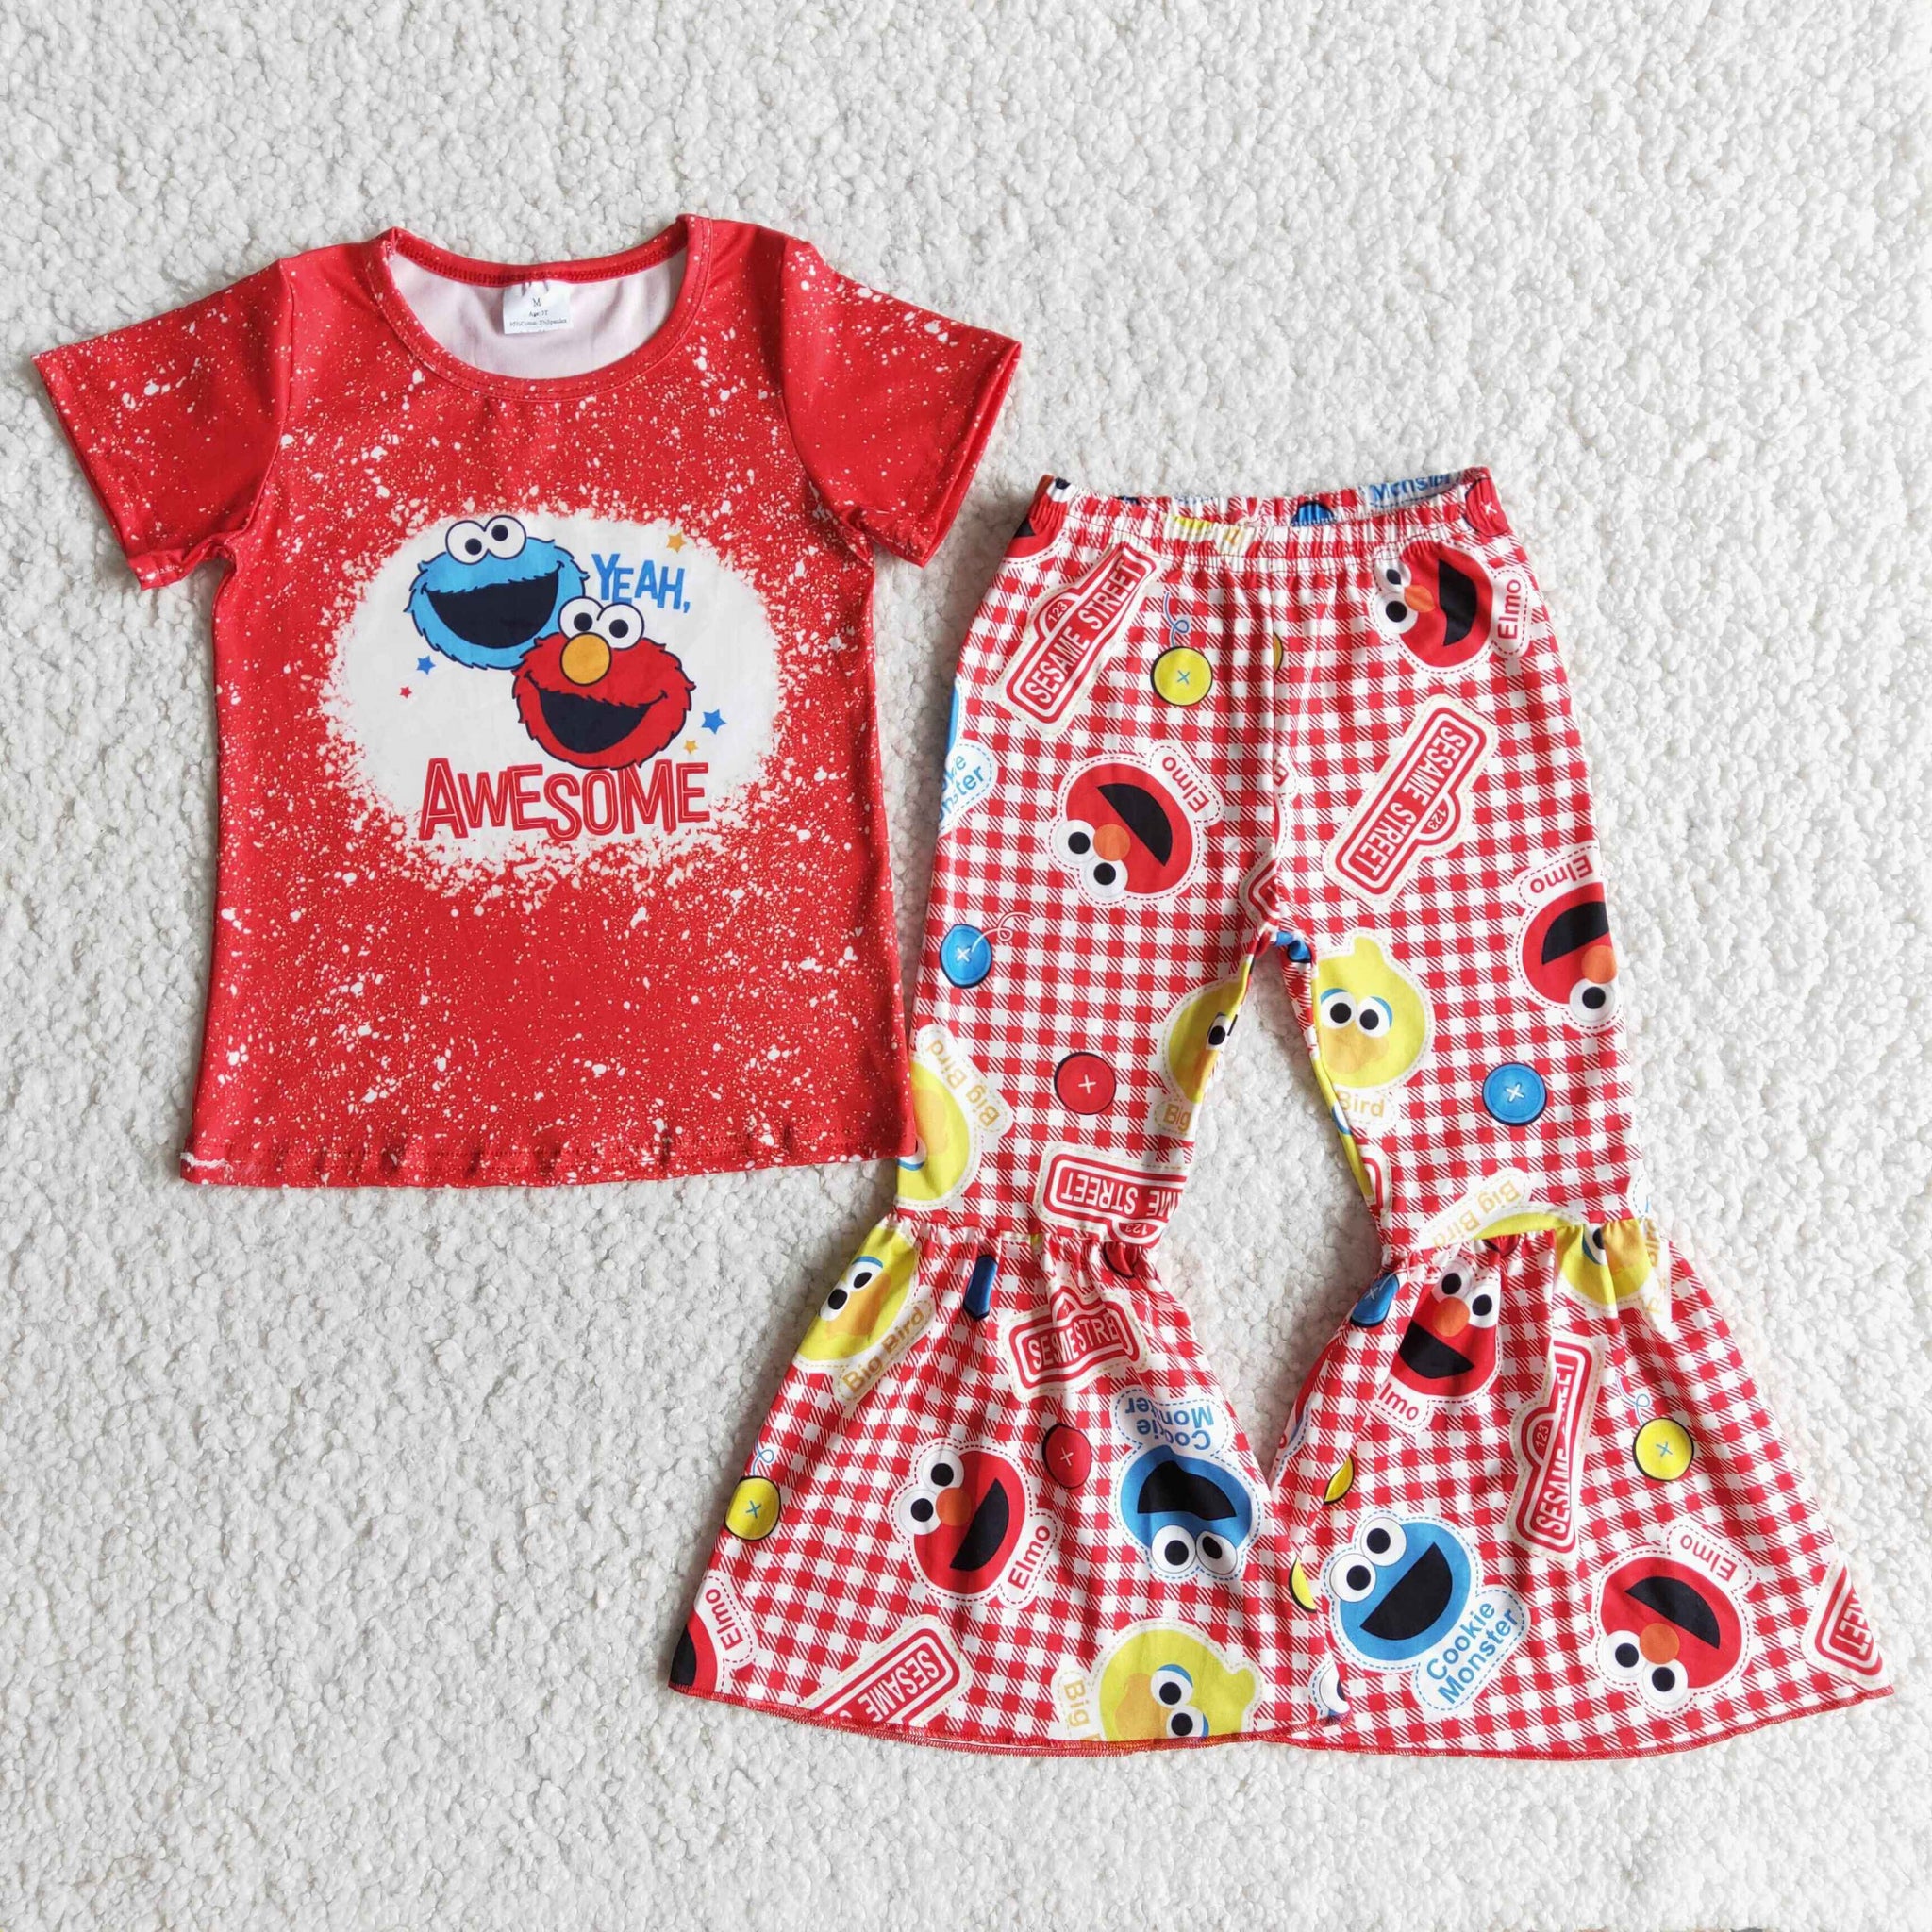 E11-17 toddler girl clothes fall 2022 cartoon red awesome set